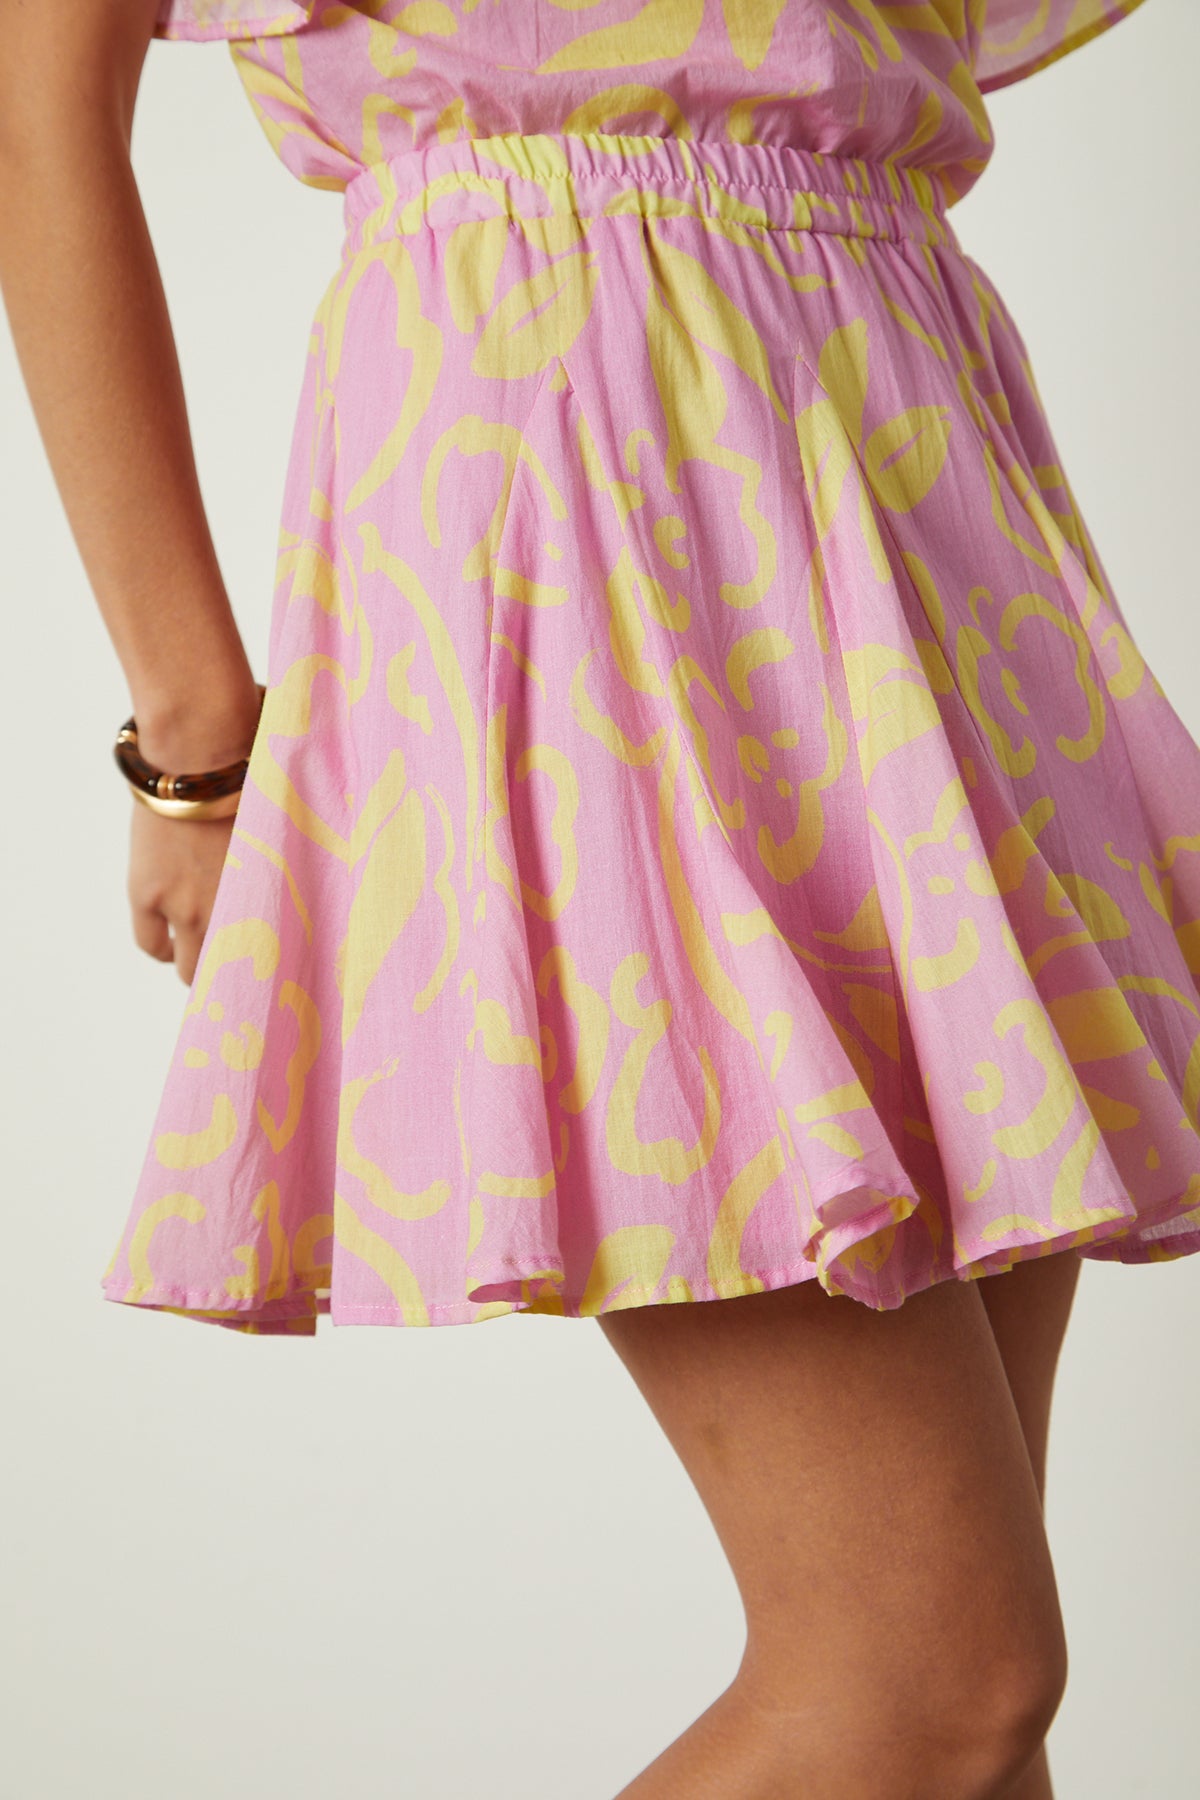 A woman in a pink and yellow dress posing in the ELSA PRINTED SKIRT by Velvet by Graham & Spencer.-25954409283777